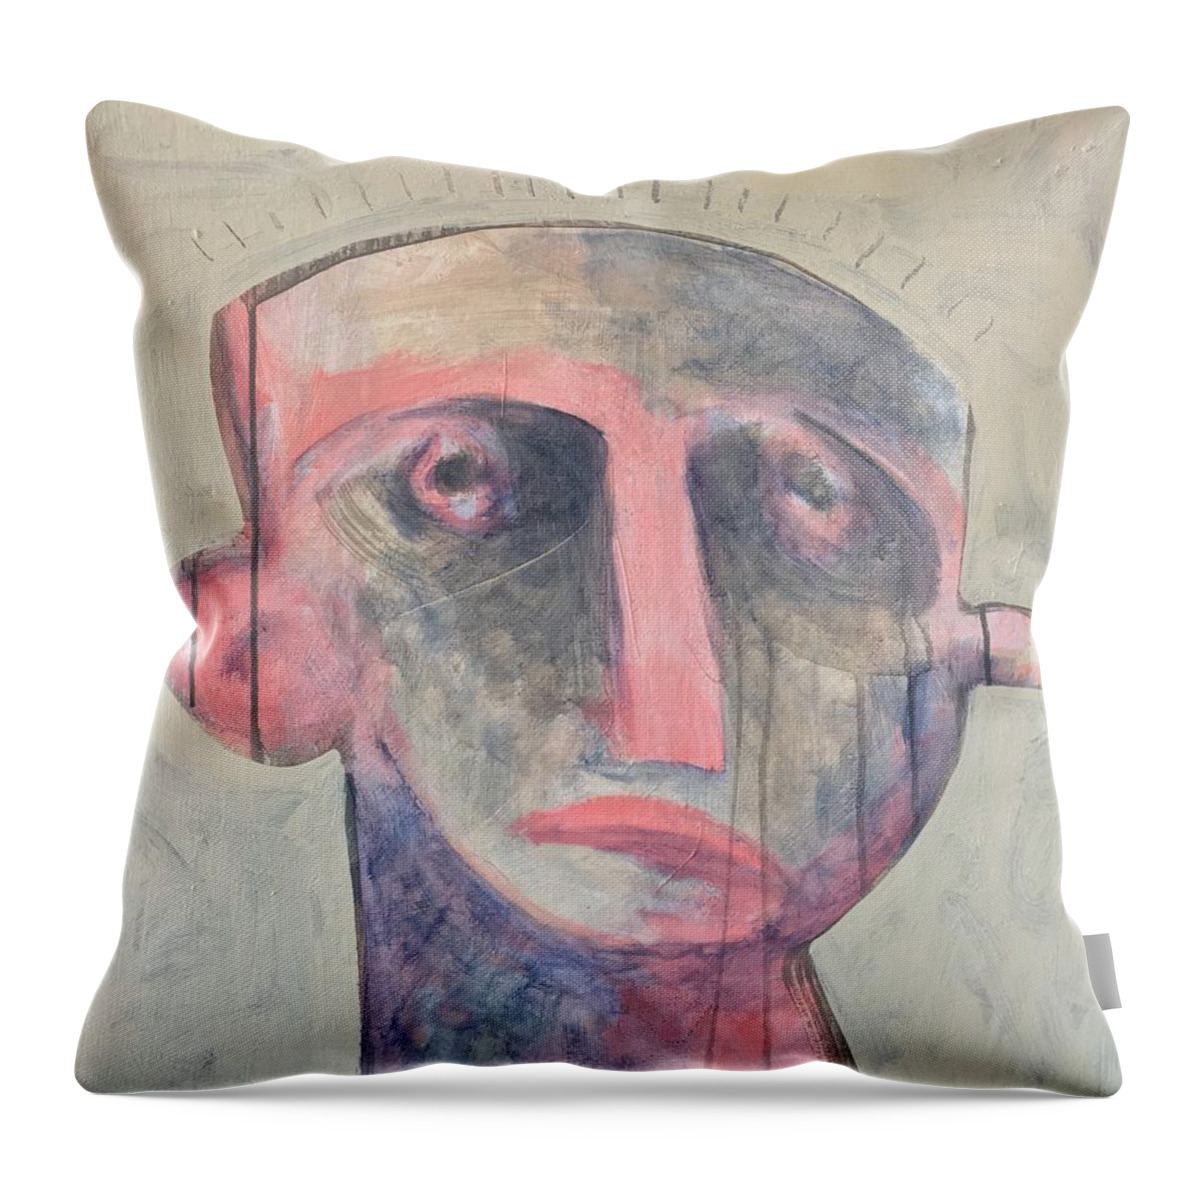  Abstract Throw Pillow featuring the painting AETAS No 19 by Mark M Mellon